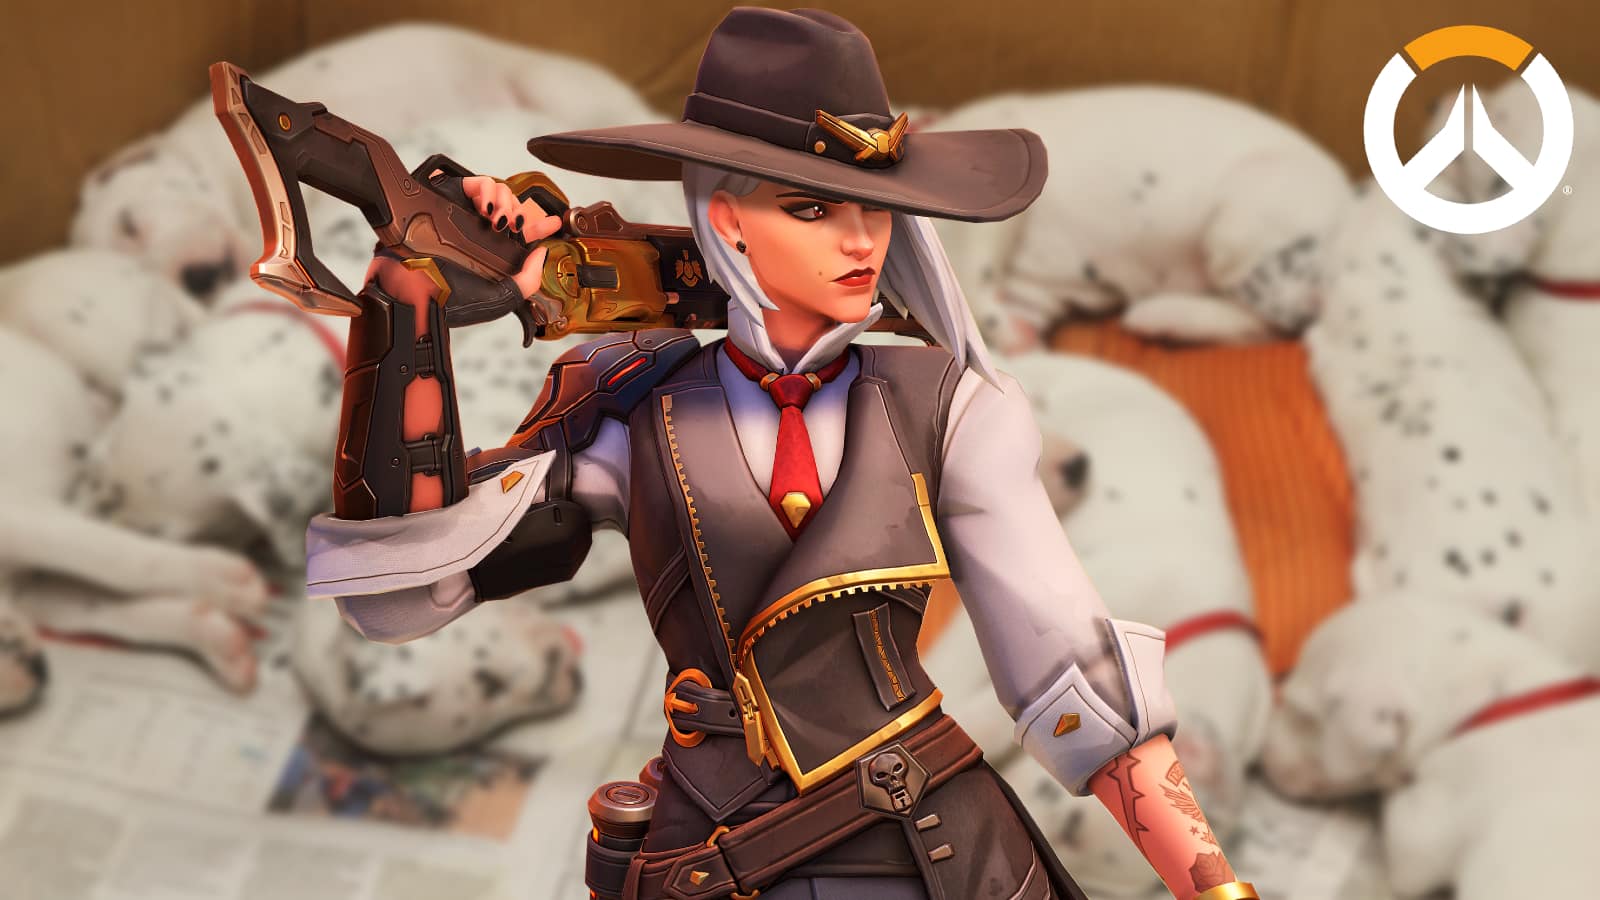 Overwatch Ashe stands against a background of Dalmatian puppies